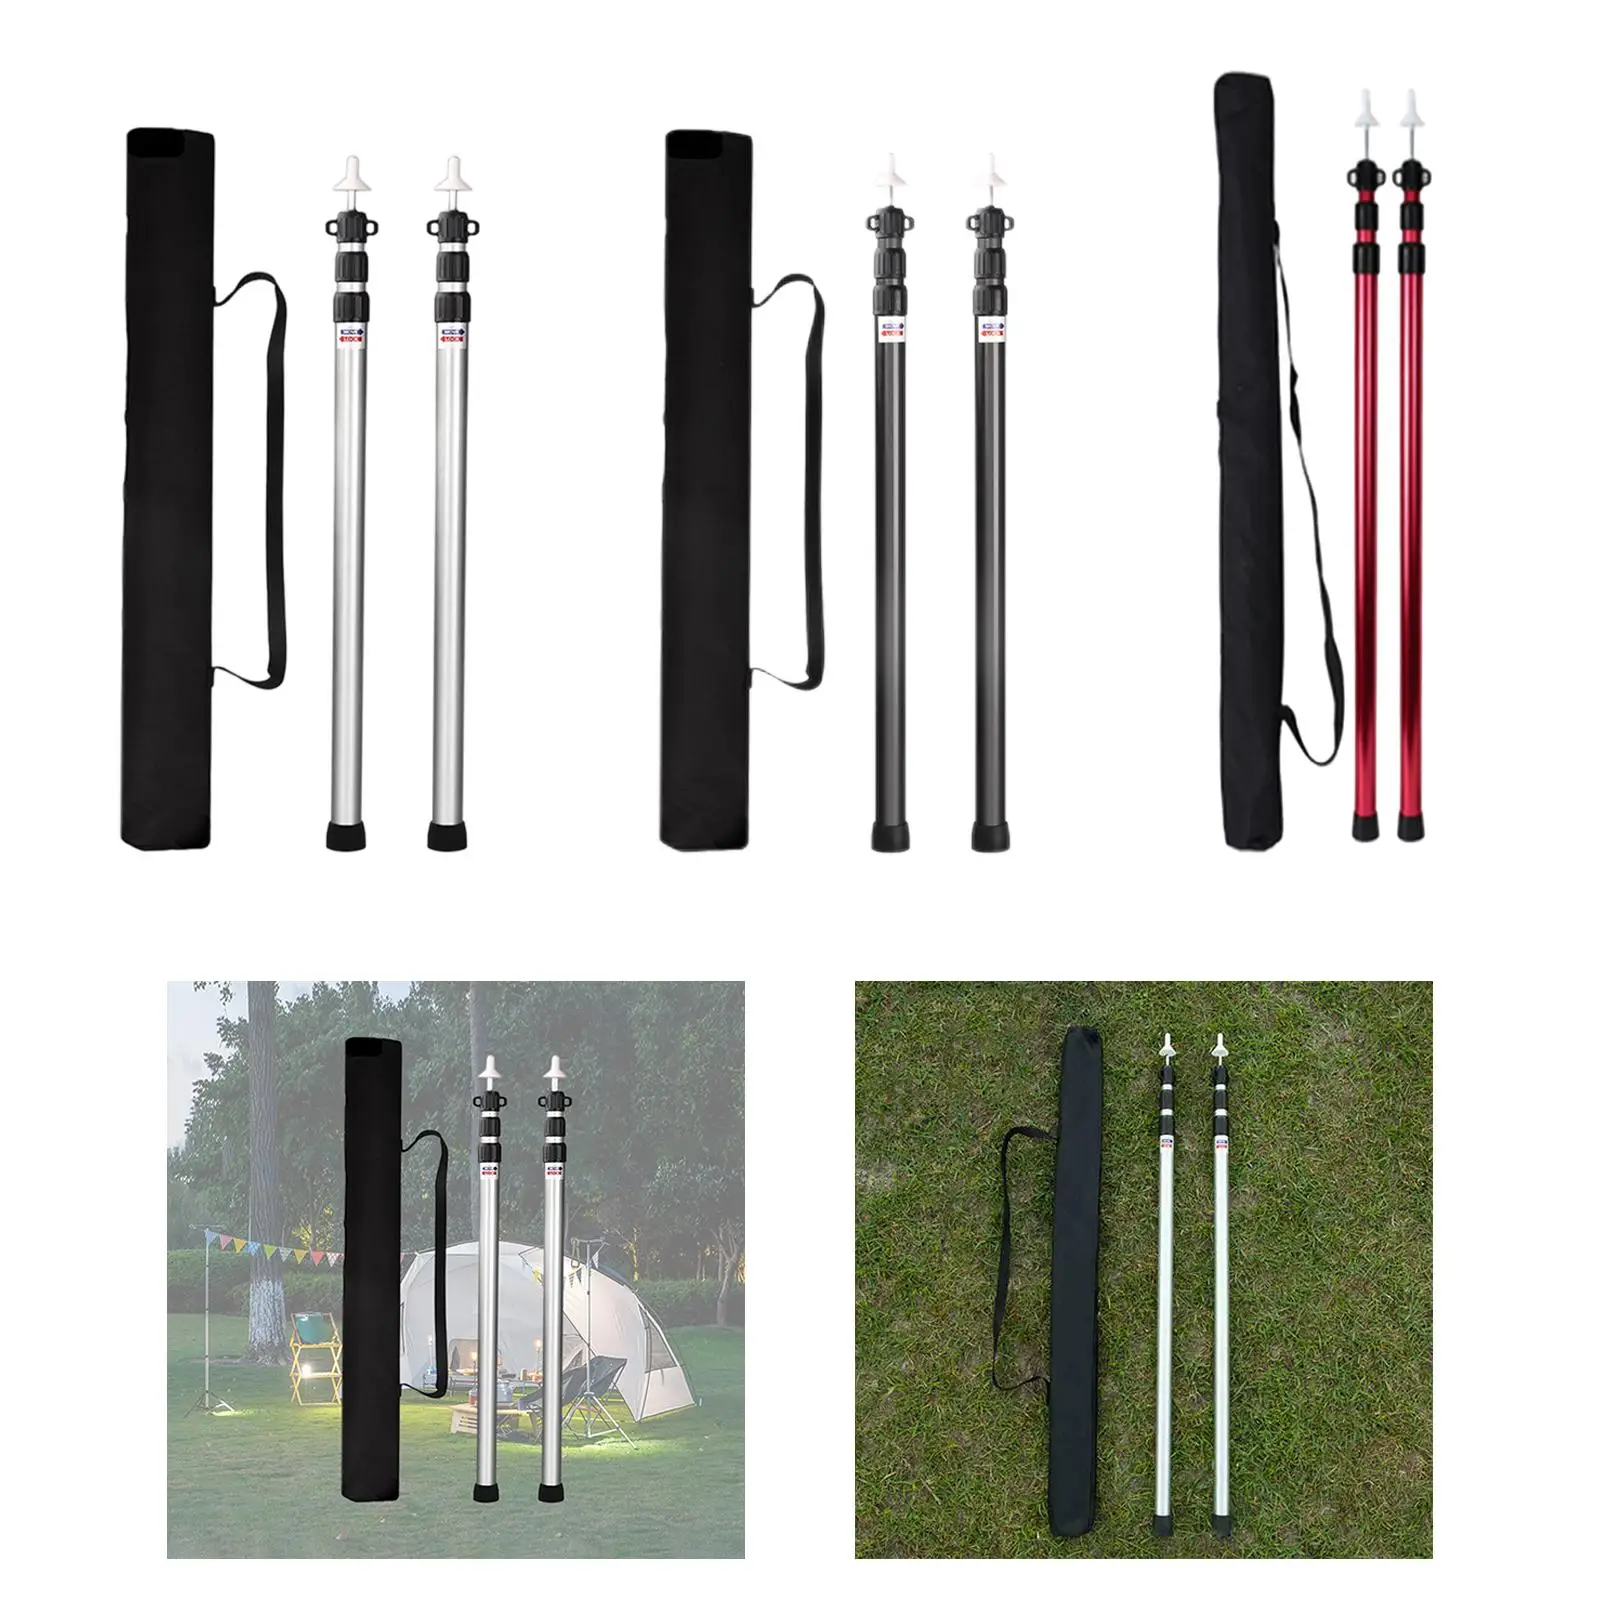 Awning Poles Camping Top 2x Telescoping Tarp Poles Adjustable for Traveling Hiking